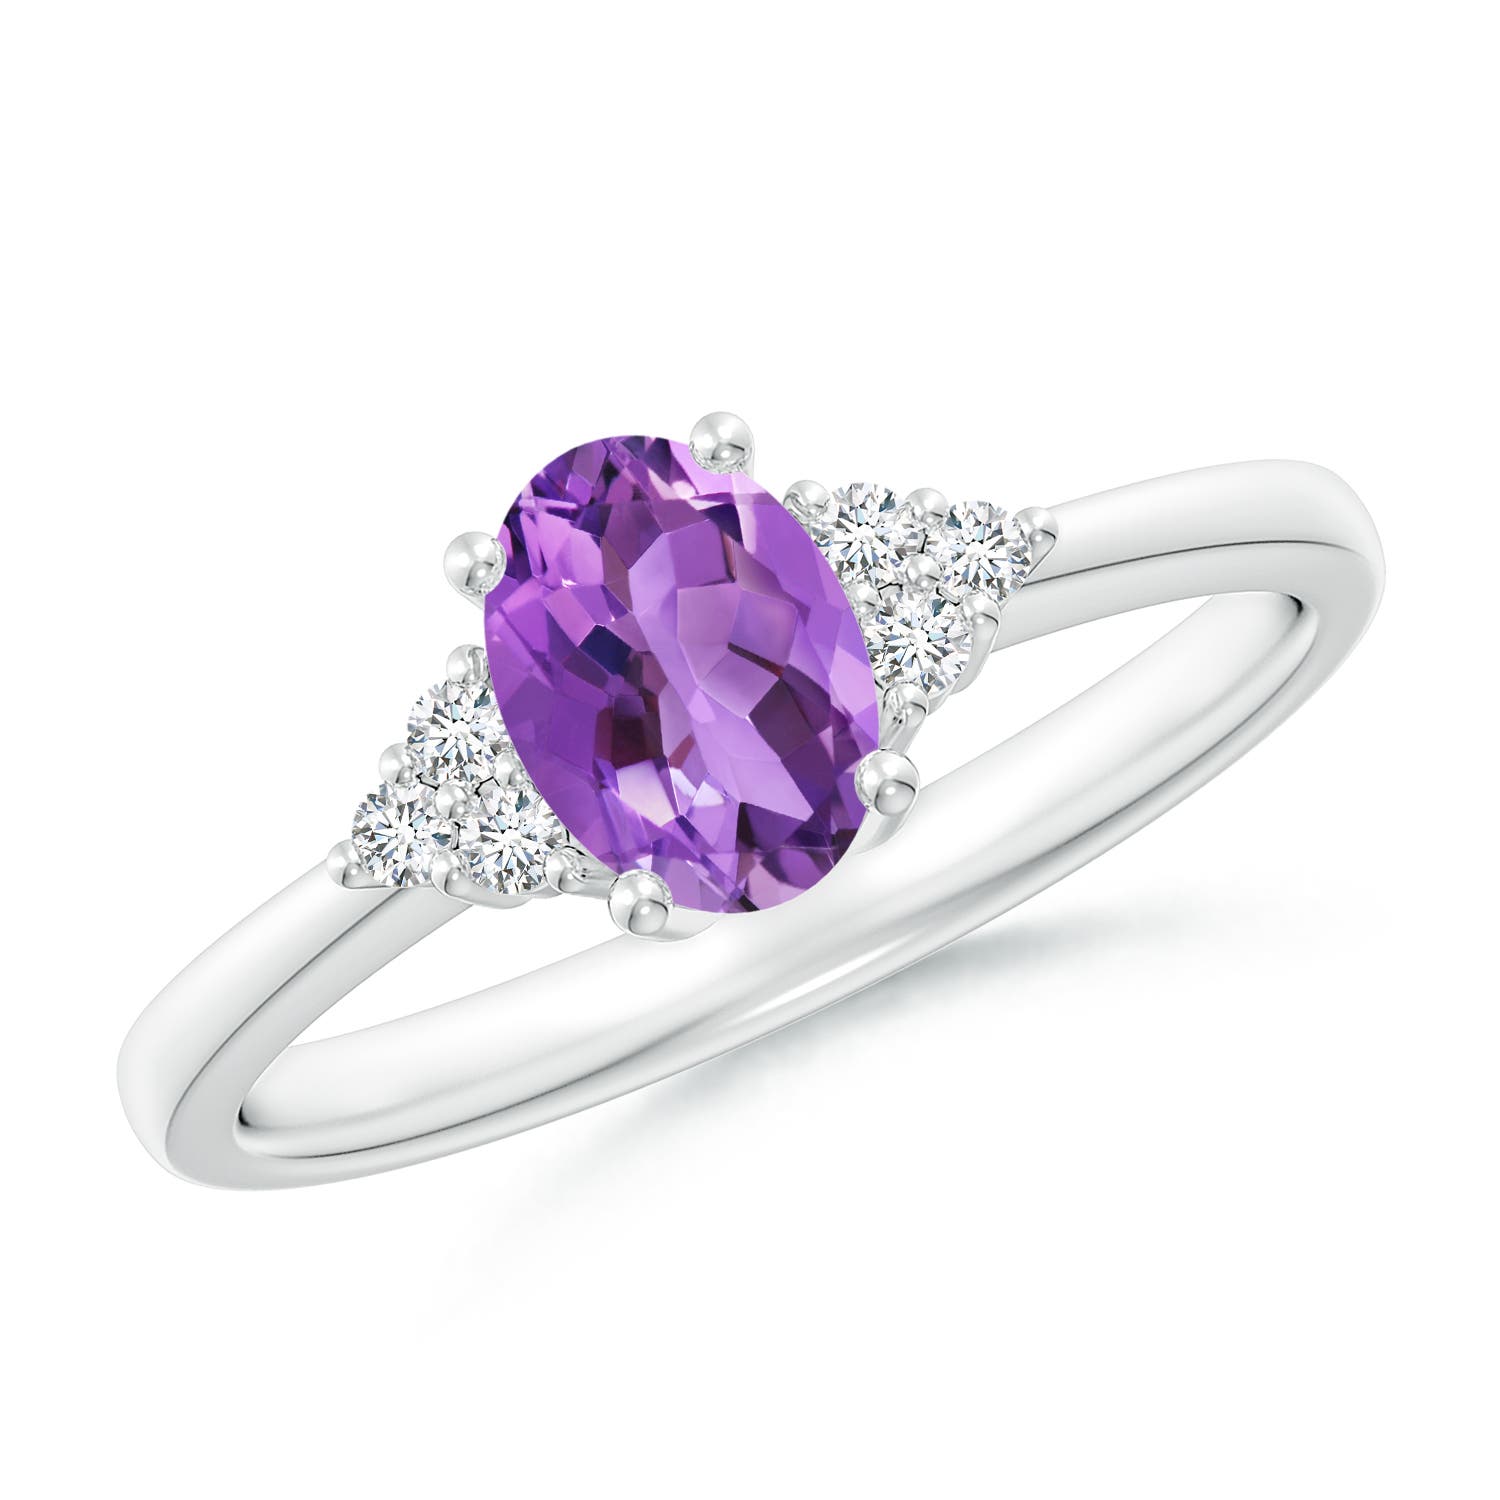 AA - Amethyst / 0.78 CT / 14 KT White Gold